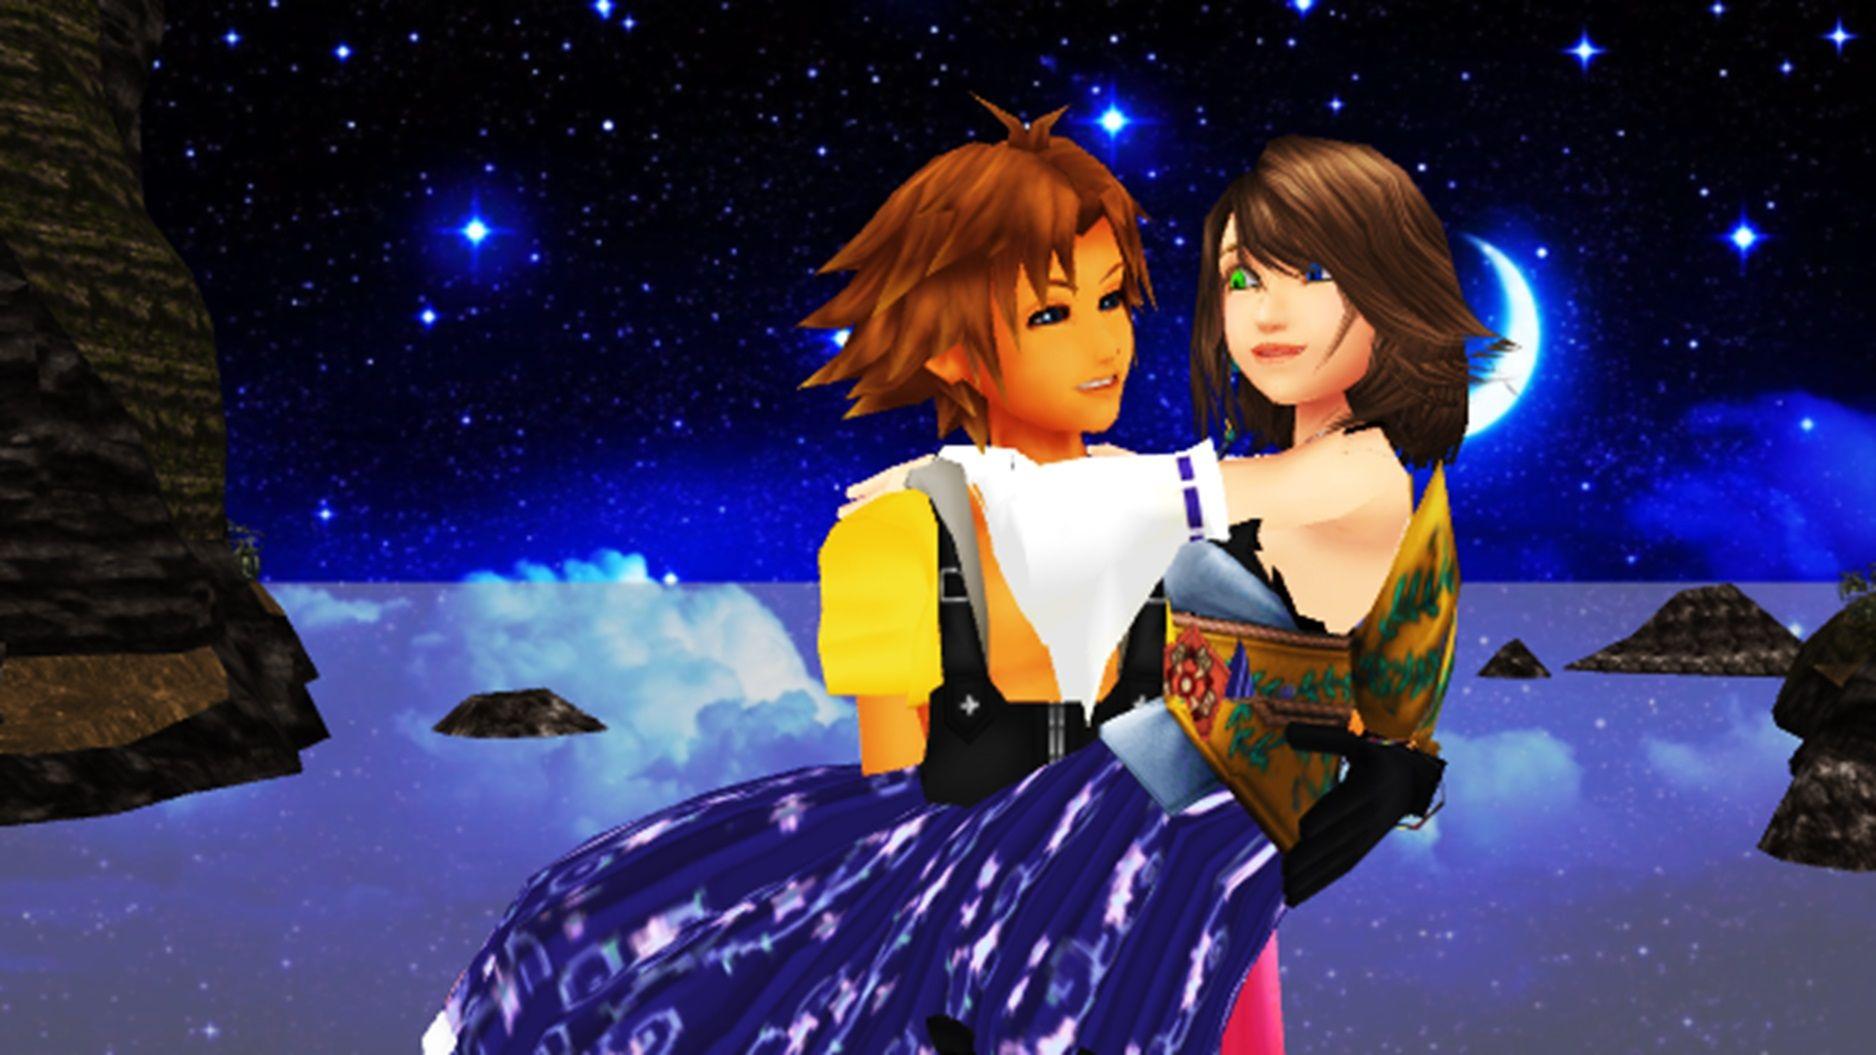 Yuna & Tidus image Tidus and Yuna Together Forever Final Fantasy X